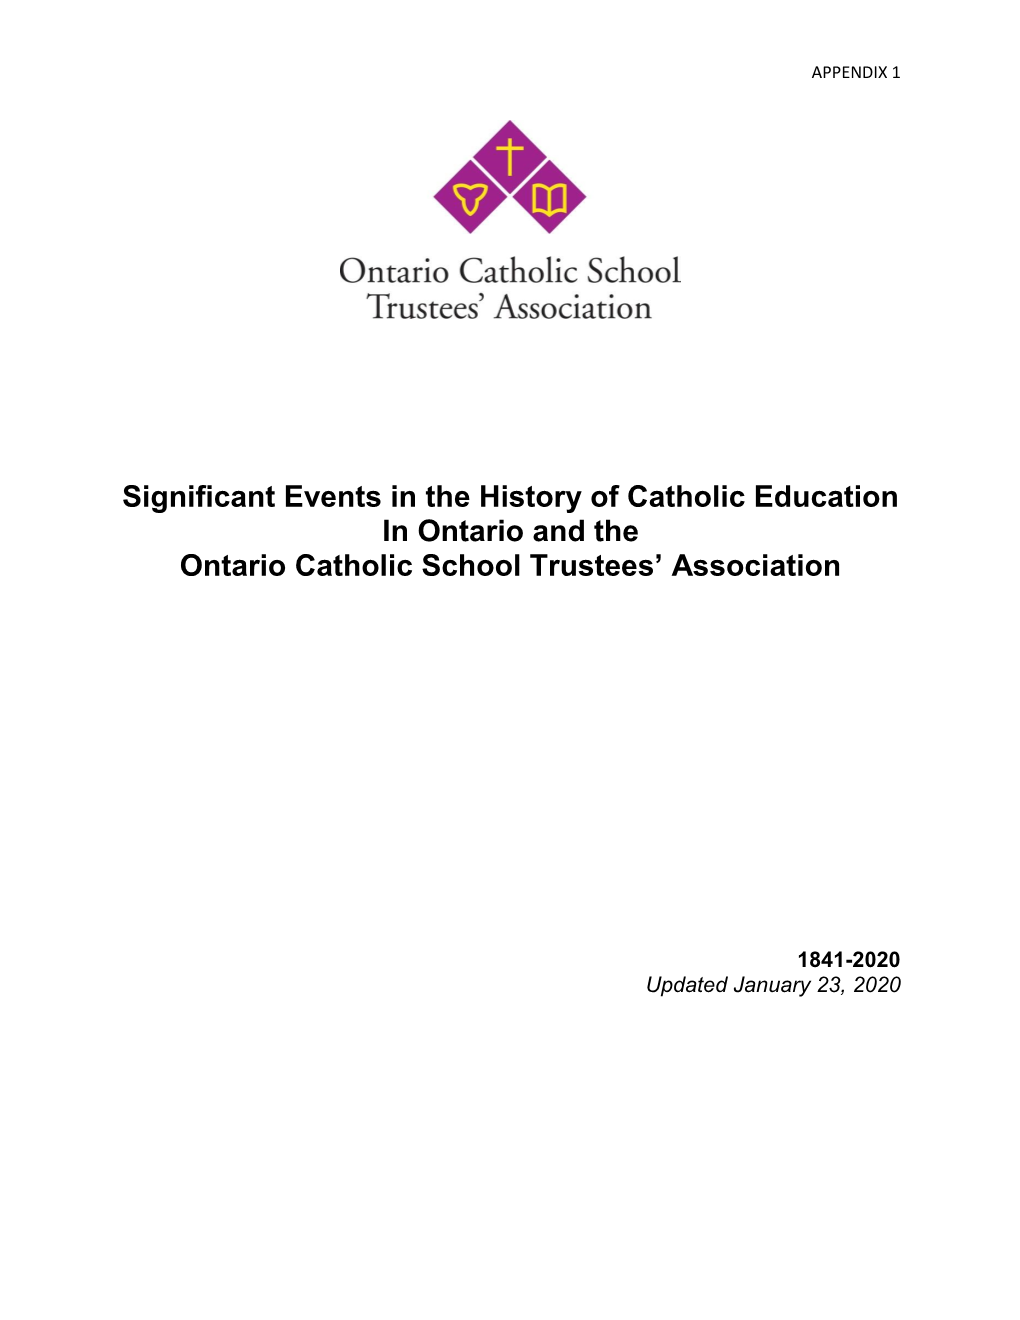 Significant Events in the History of Catholic Education in Ontario and the Ontario Catholic School Trustees’ Association